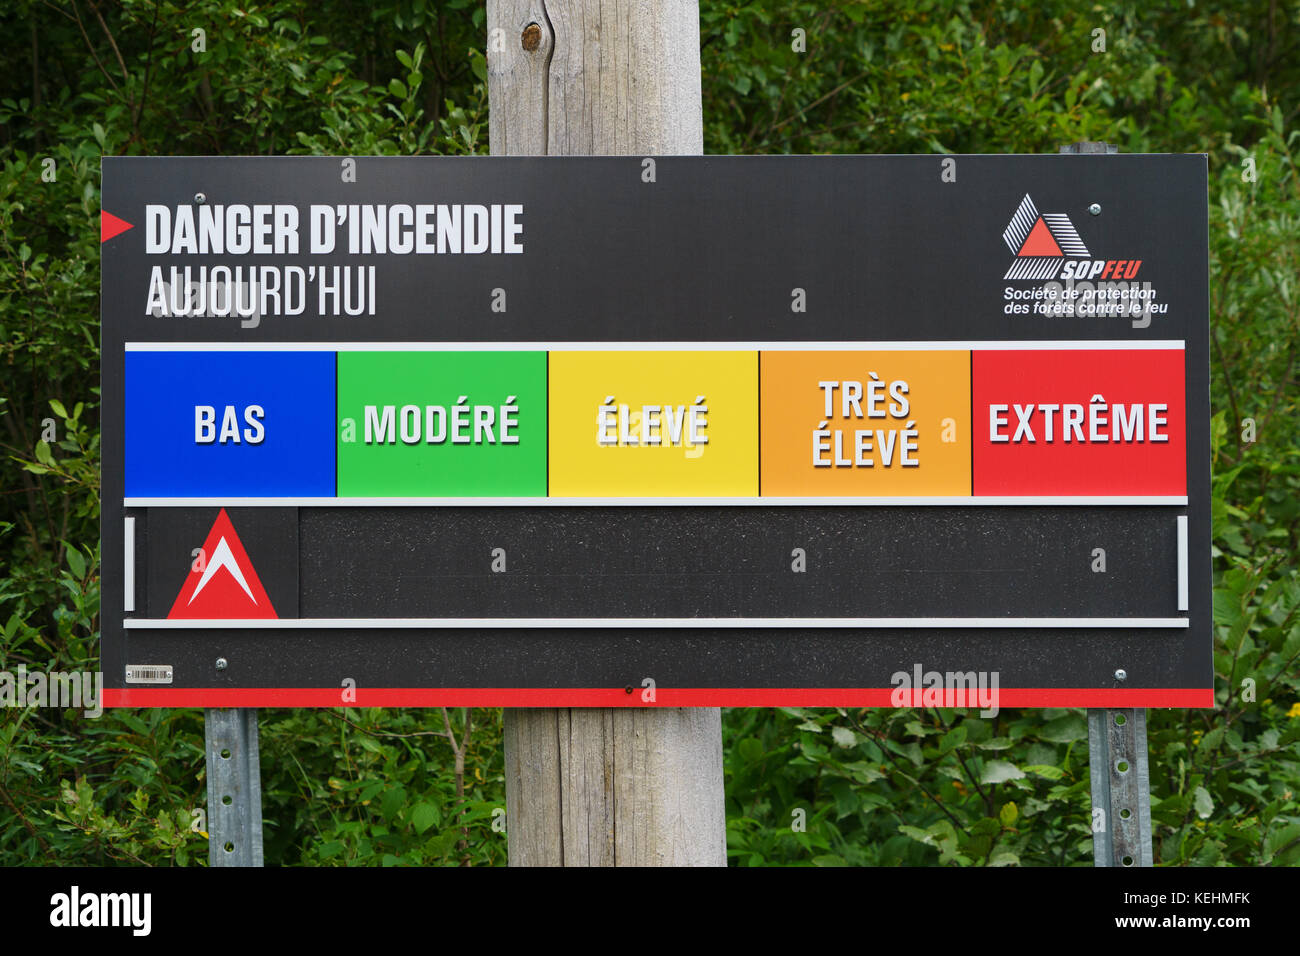 Forest fire danger sign in French, province of Quebec, Canada. Stock Photo